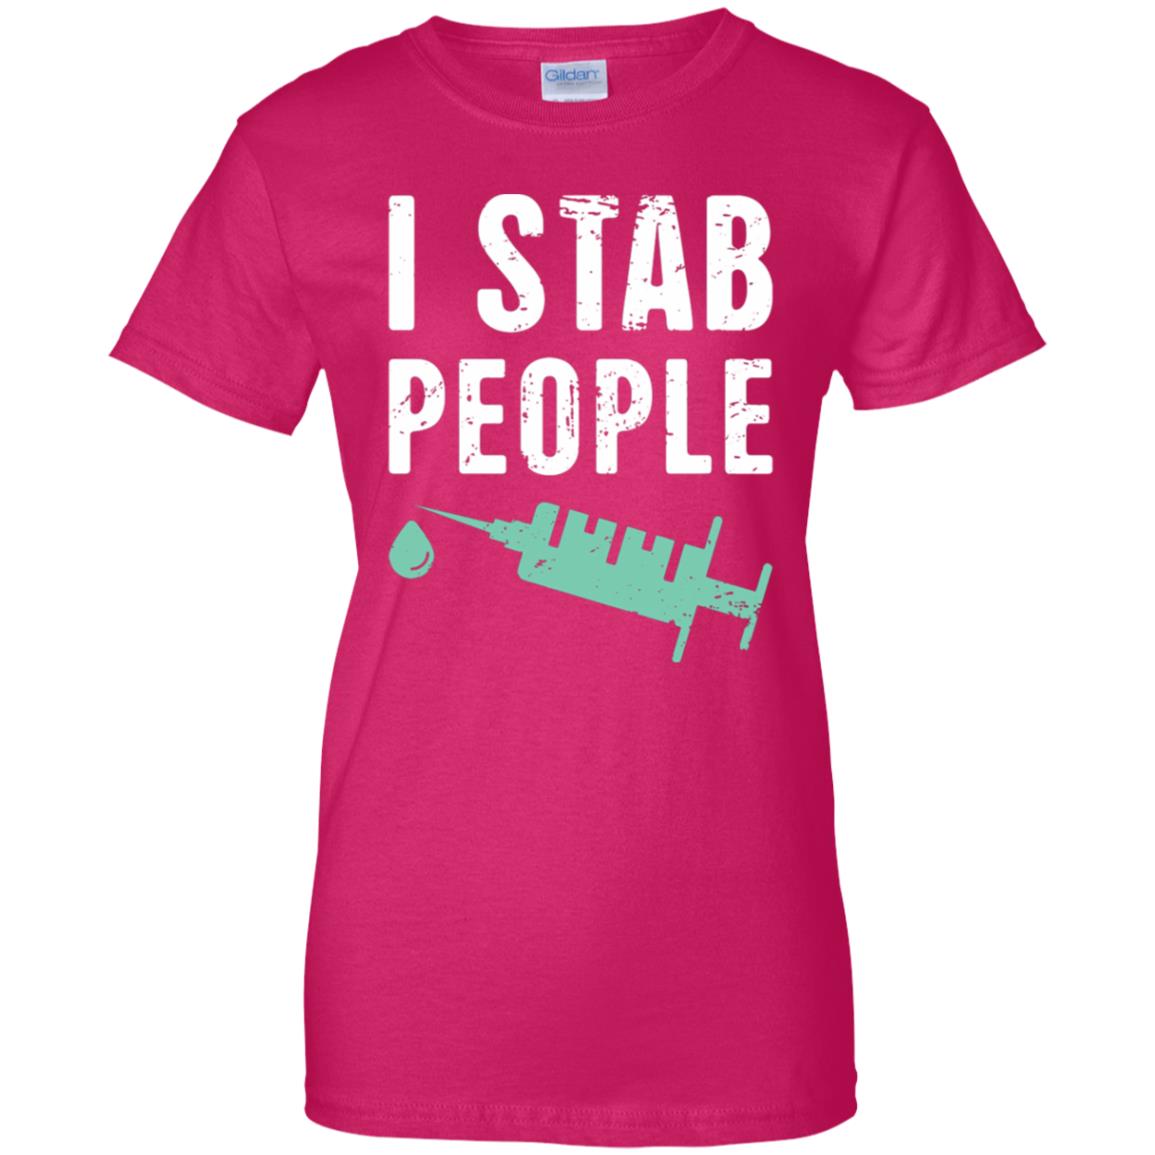 I Stab People T-Shirt - 10% Off - FavorMerch